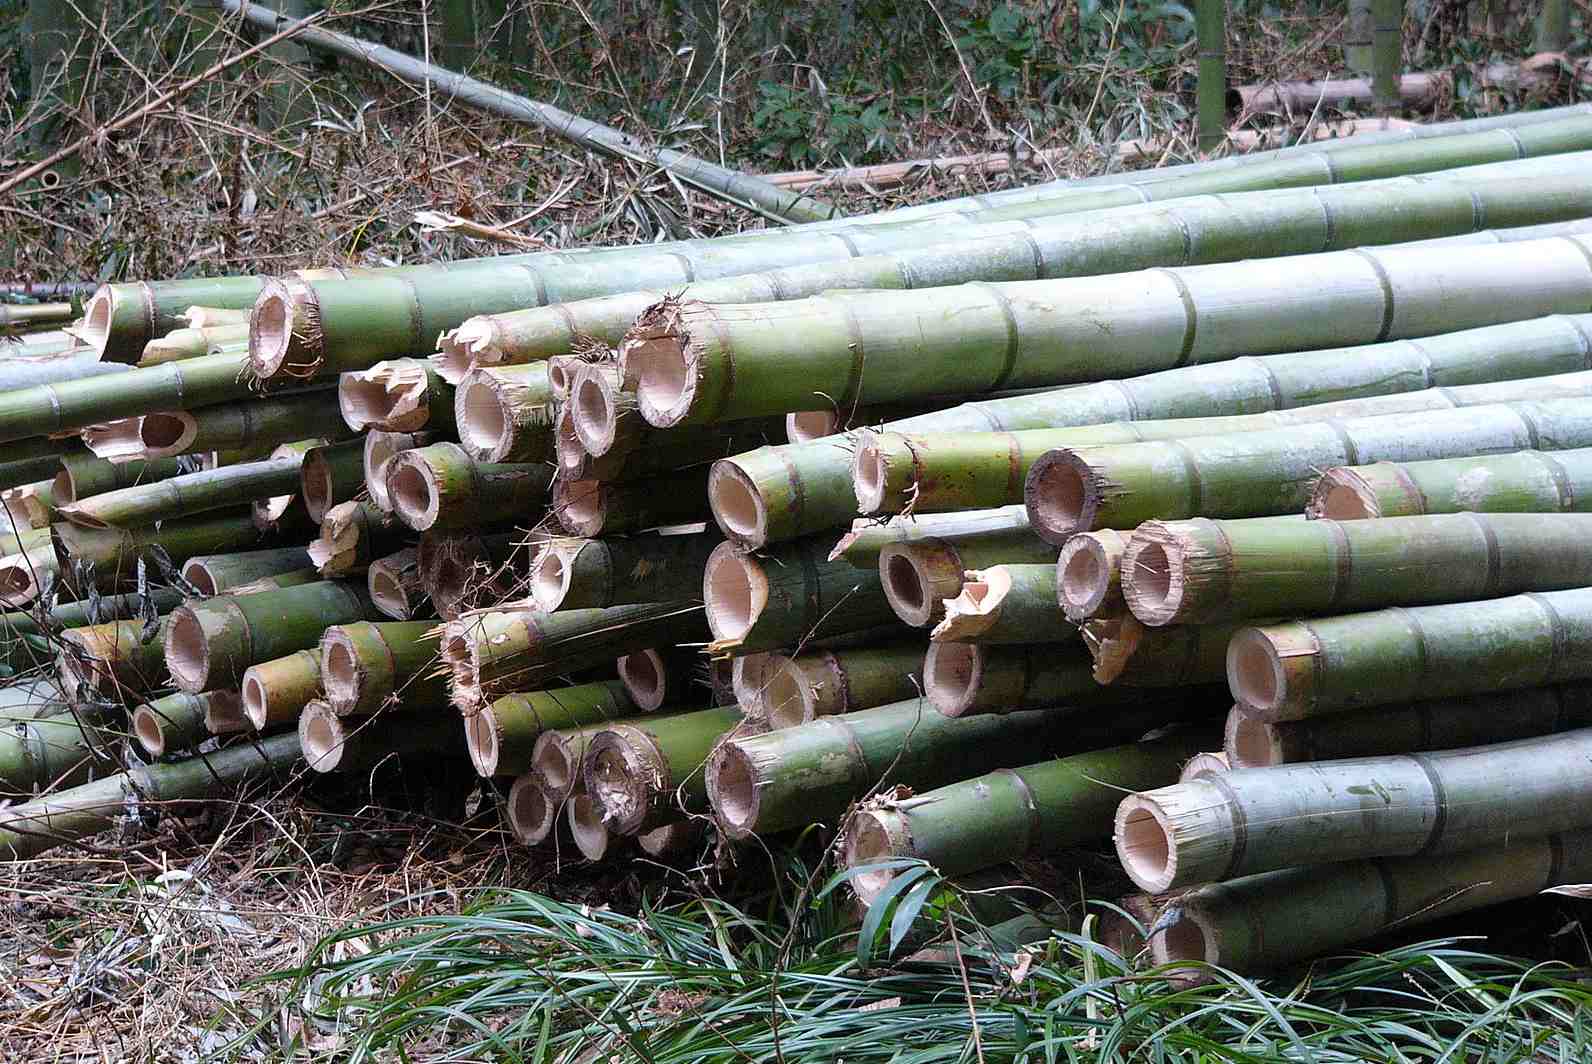 Farming Growing Bamboo for Profit